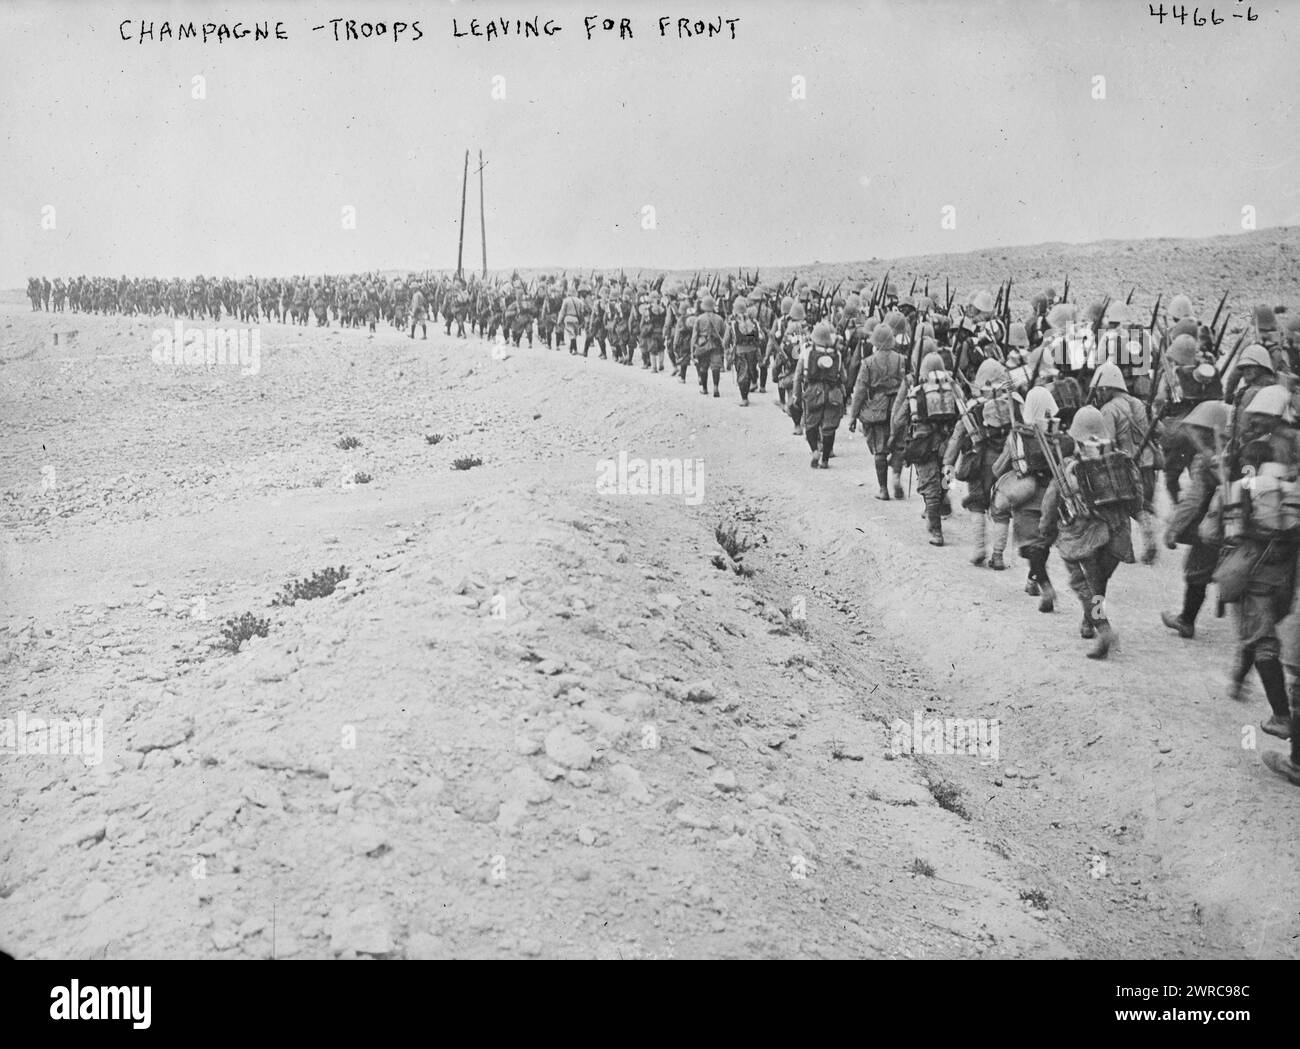 Champagne, troops leaving for front, Photograph shows soldiers marching to the front from Champagne, France during World War I., between ca. 1915 and 1918, World War, 1914-1918, Glass negatives, 1 negative: glass Stock Photo